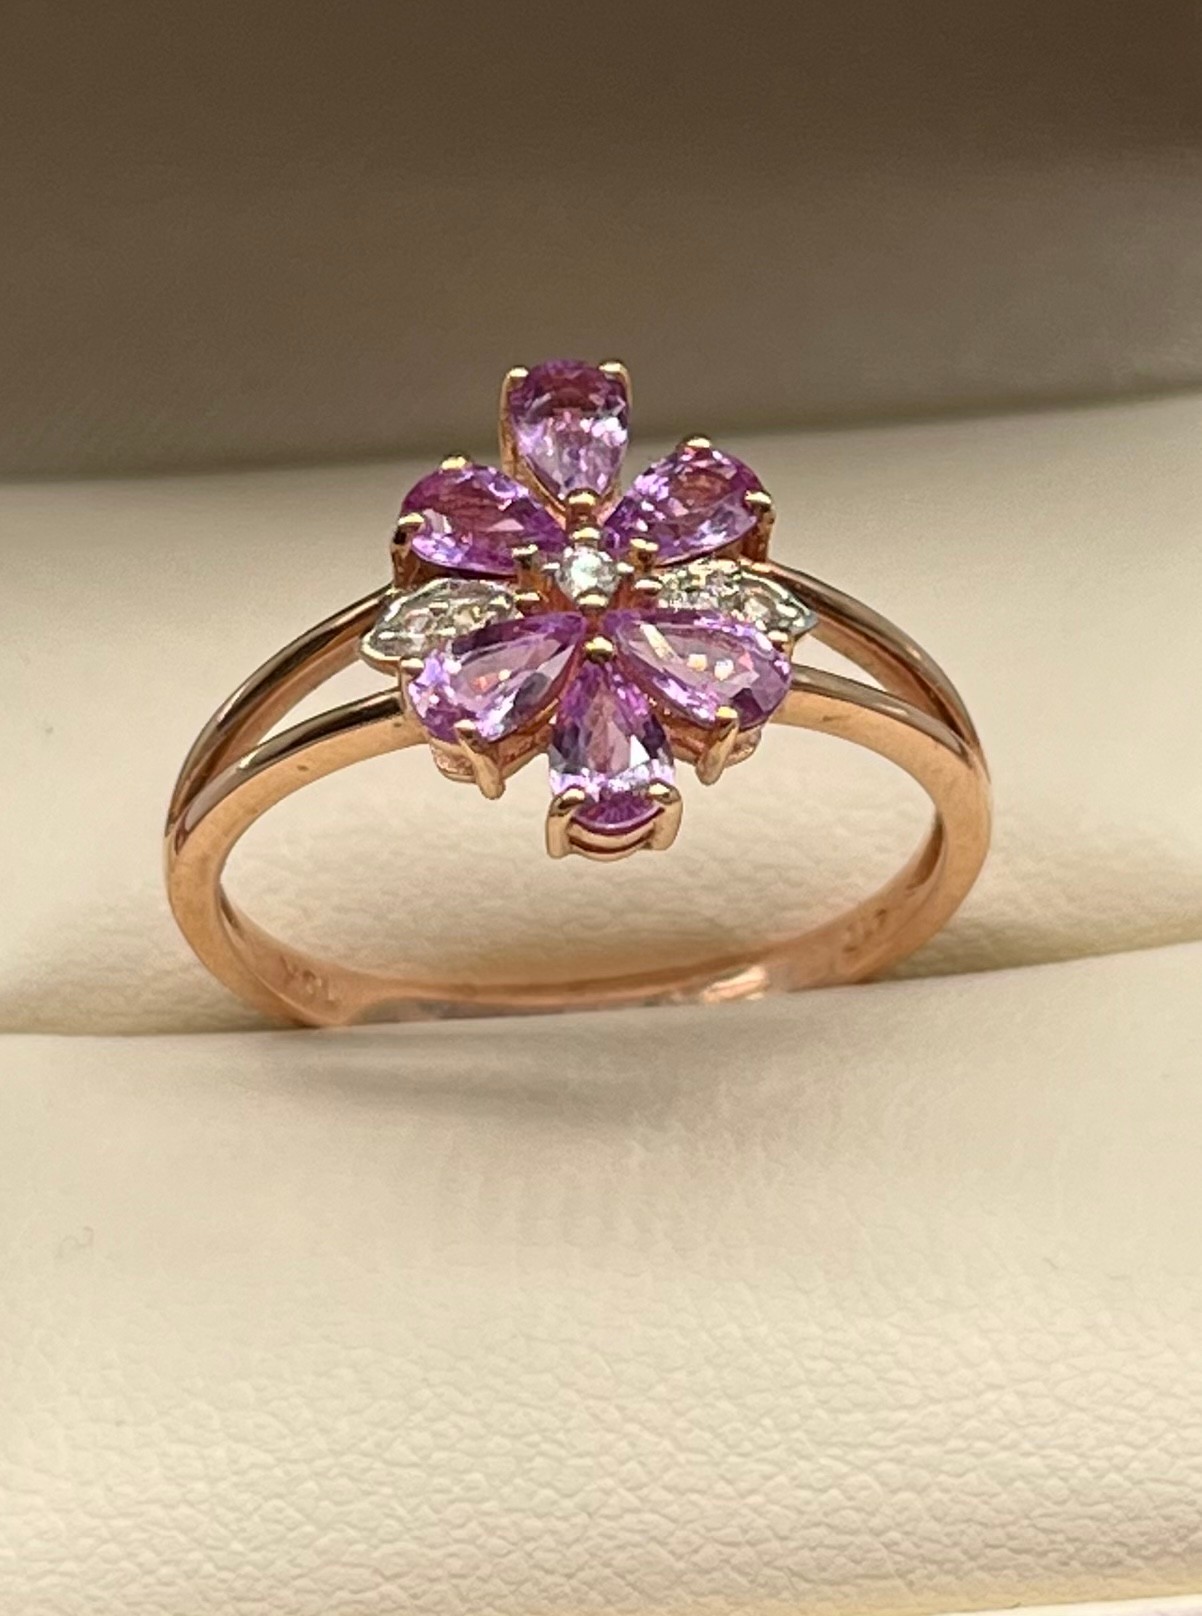 10ct yellow gold ladies ring set with purple & white topaz stones, designed in a flower shape. [Ring - Image 2 of 2